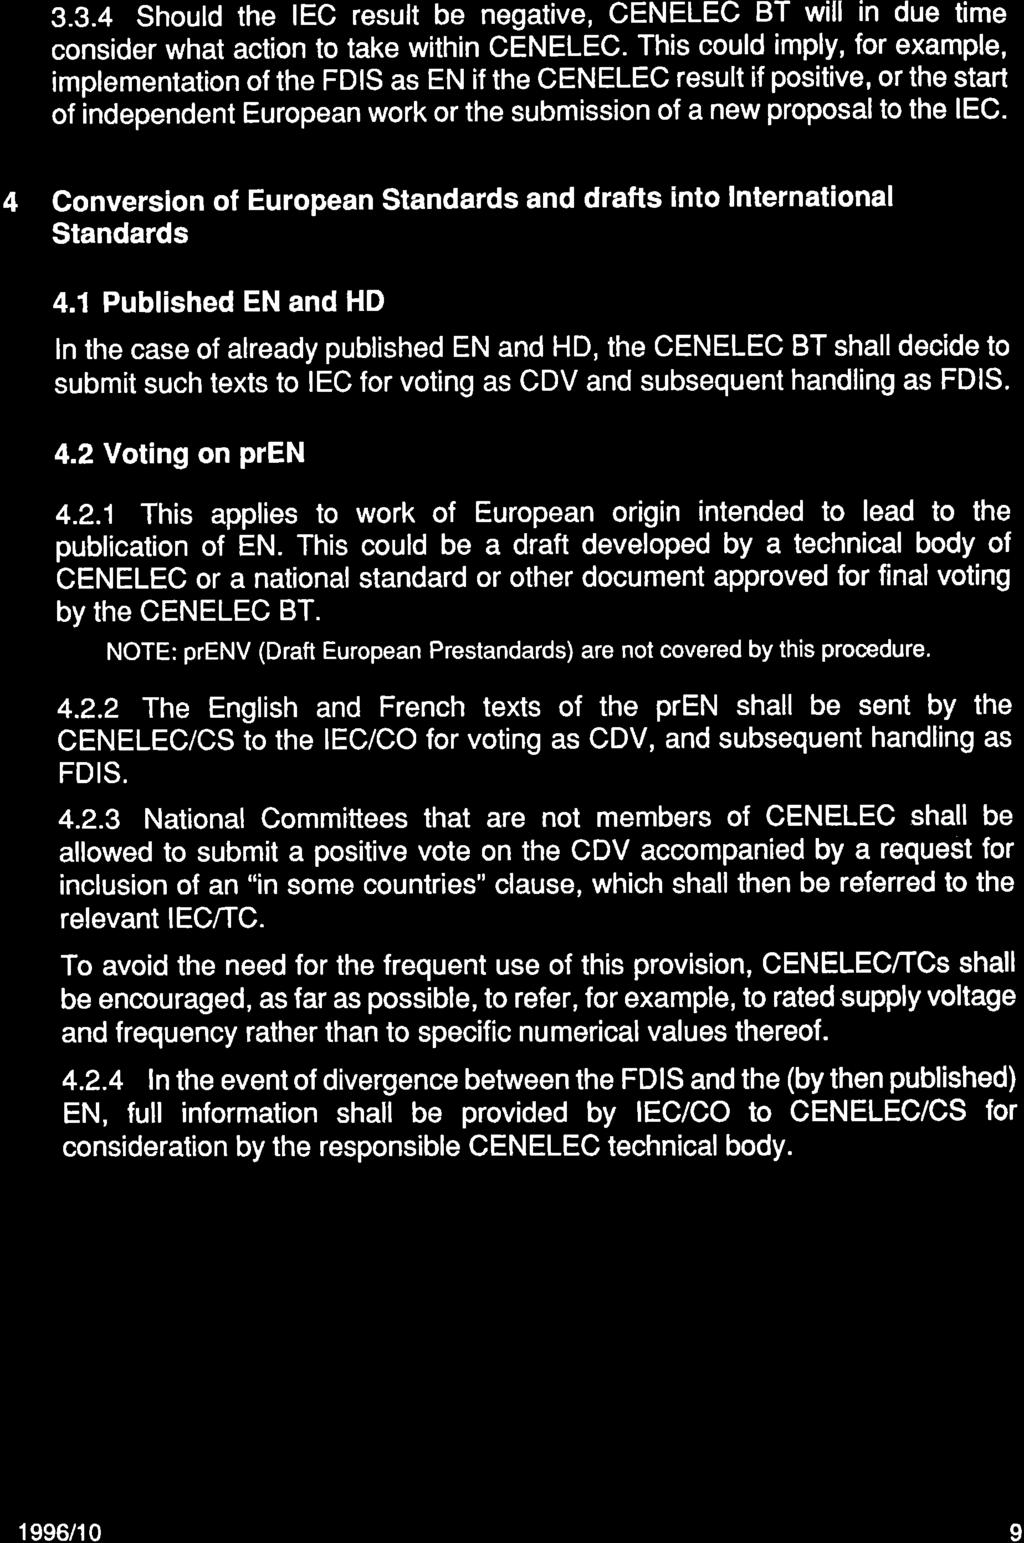 3.3.4 Should the IEC result be negative, CENELEC BT will in due time cons der what action to take within CENELEC.